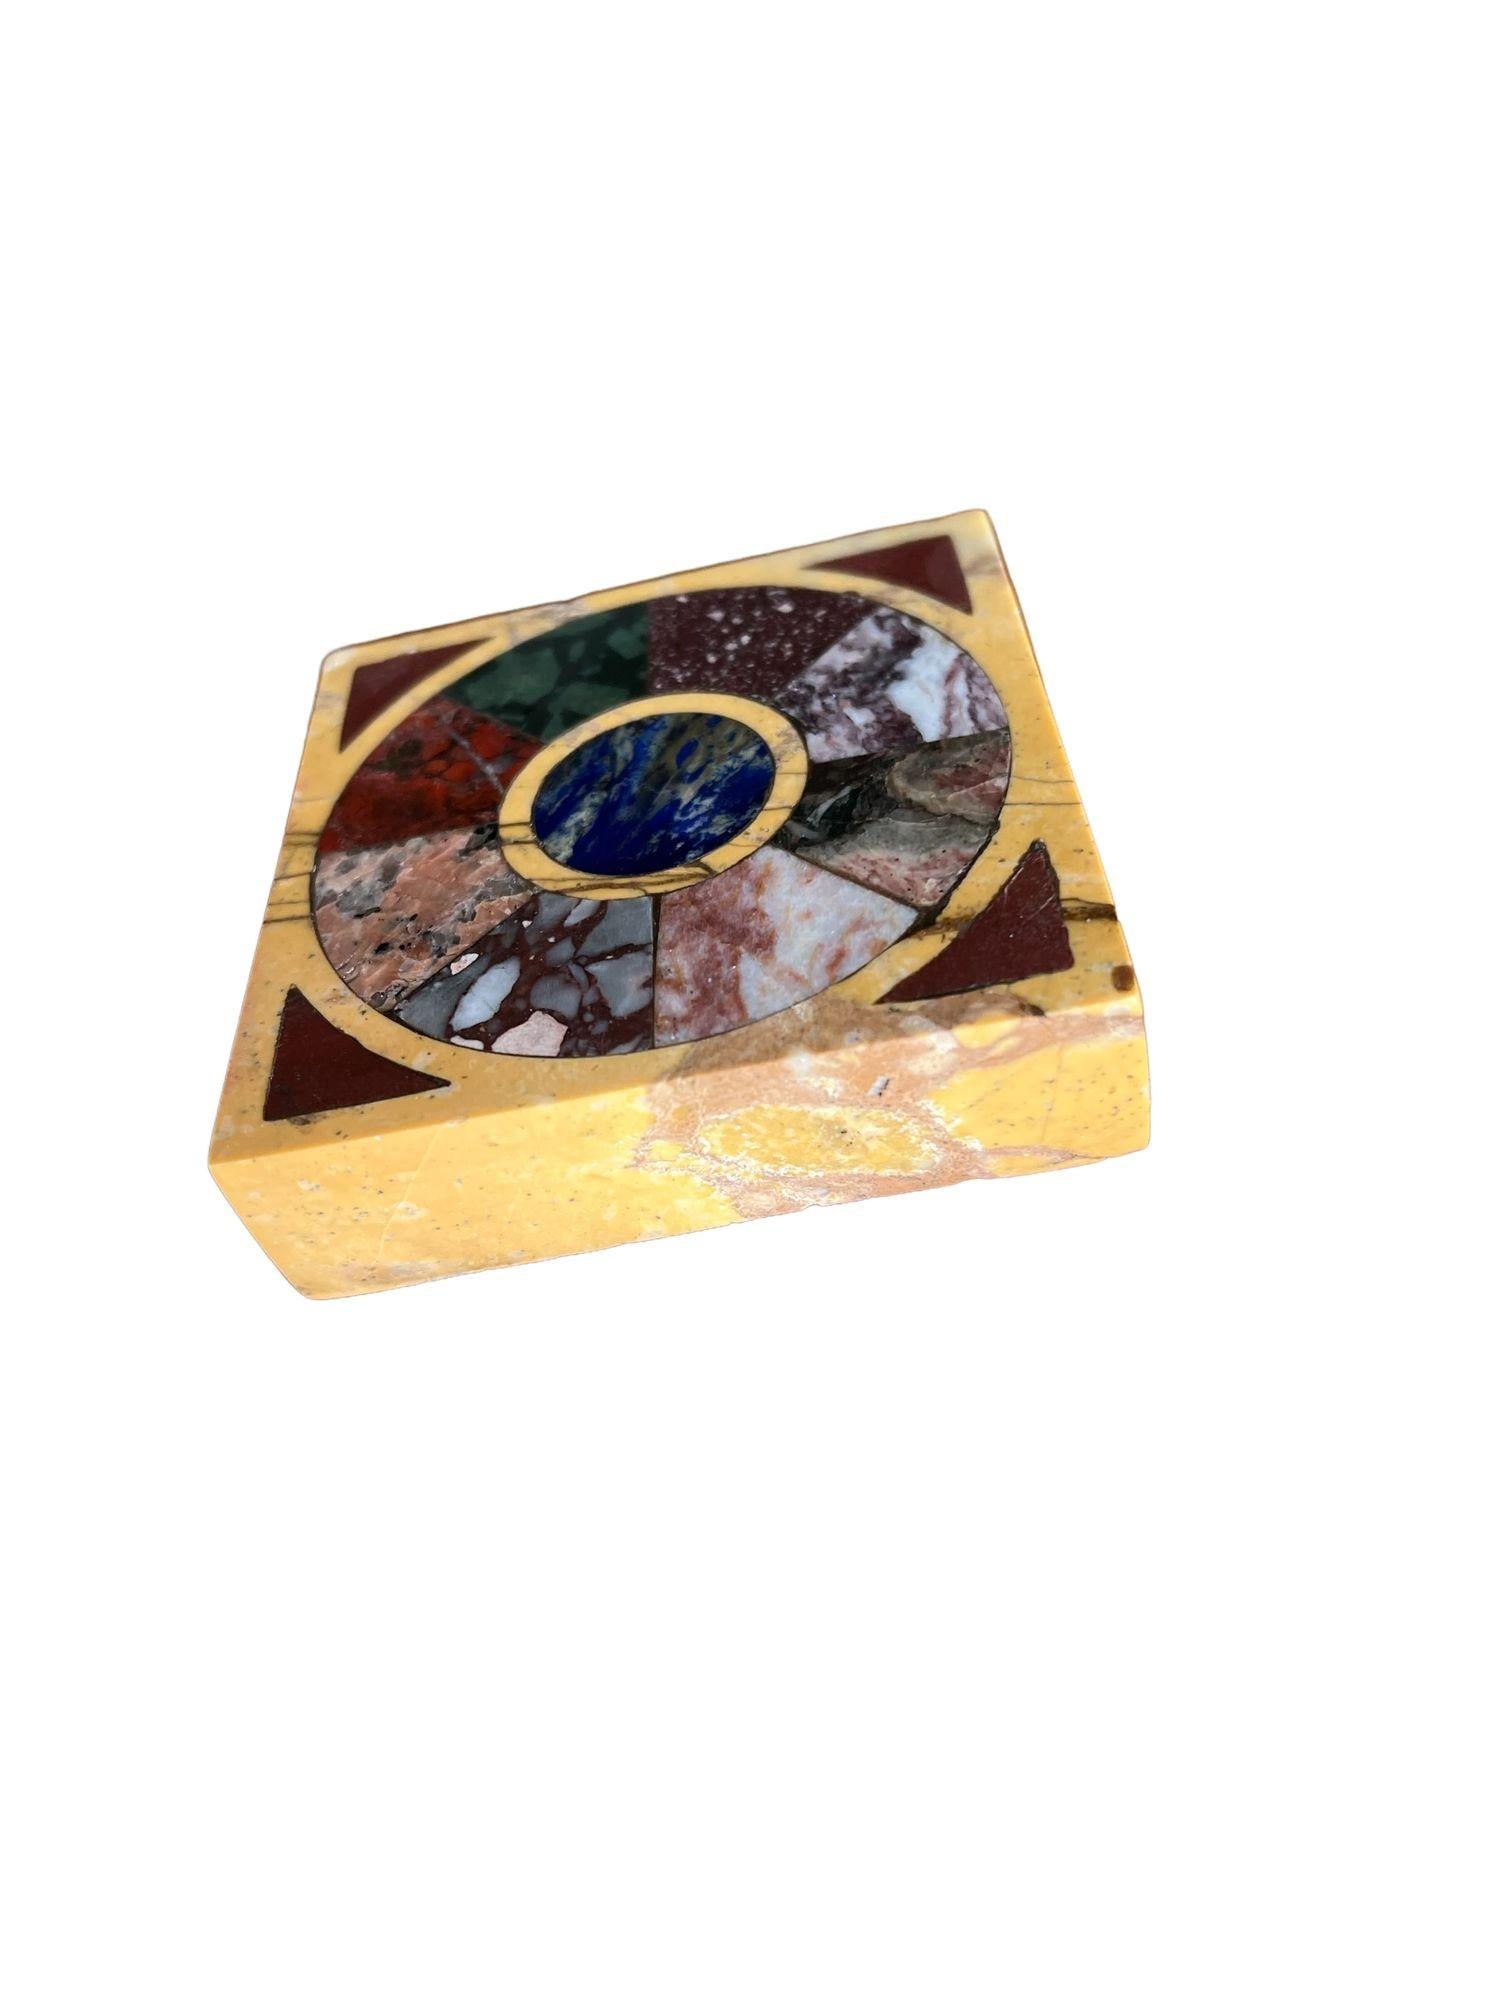 The square paperweight with specimen marbles inset in yellow marble ground.